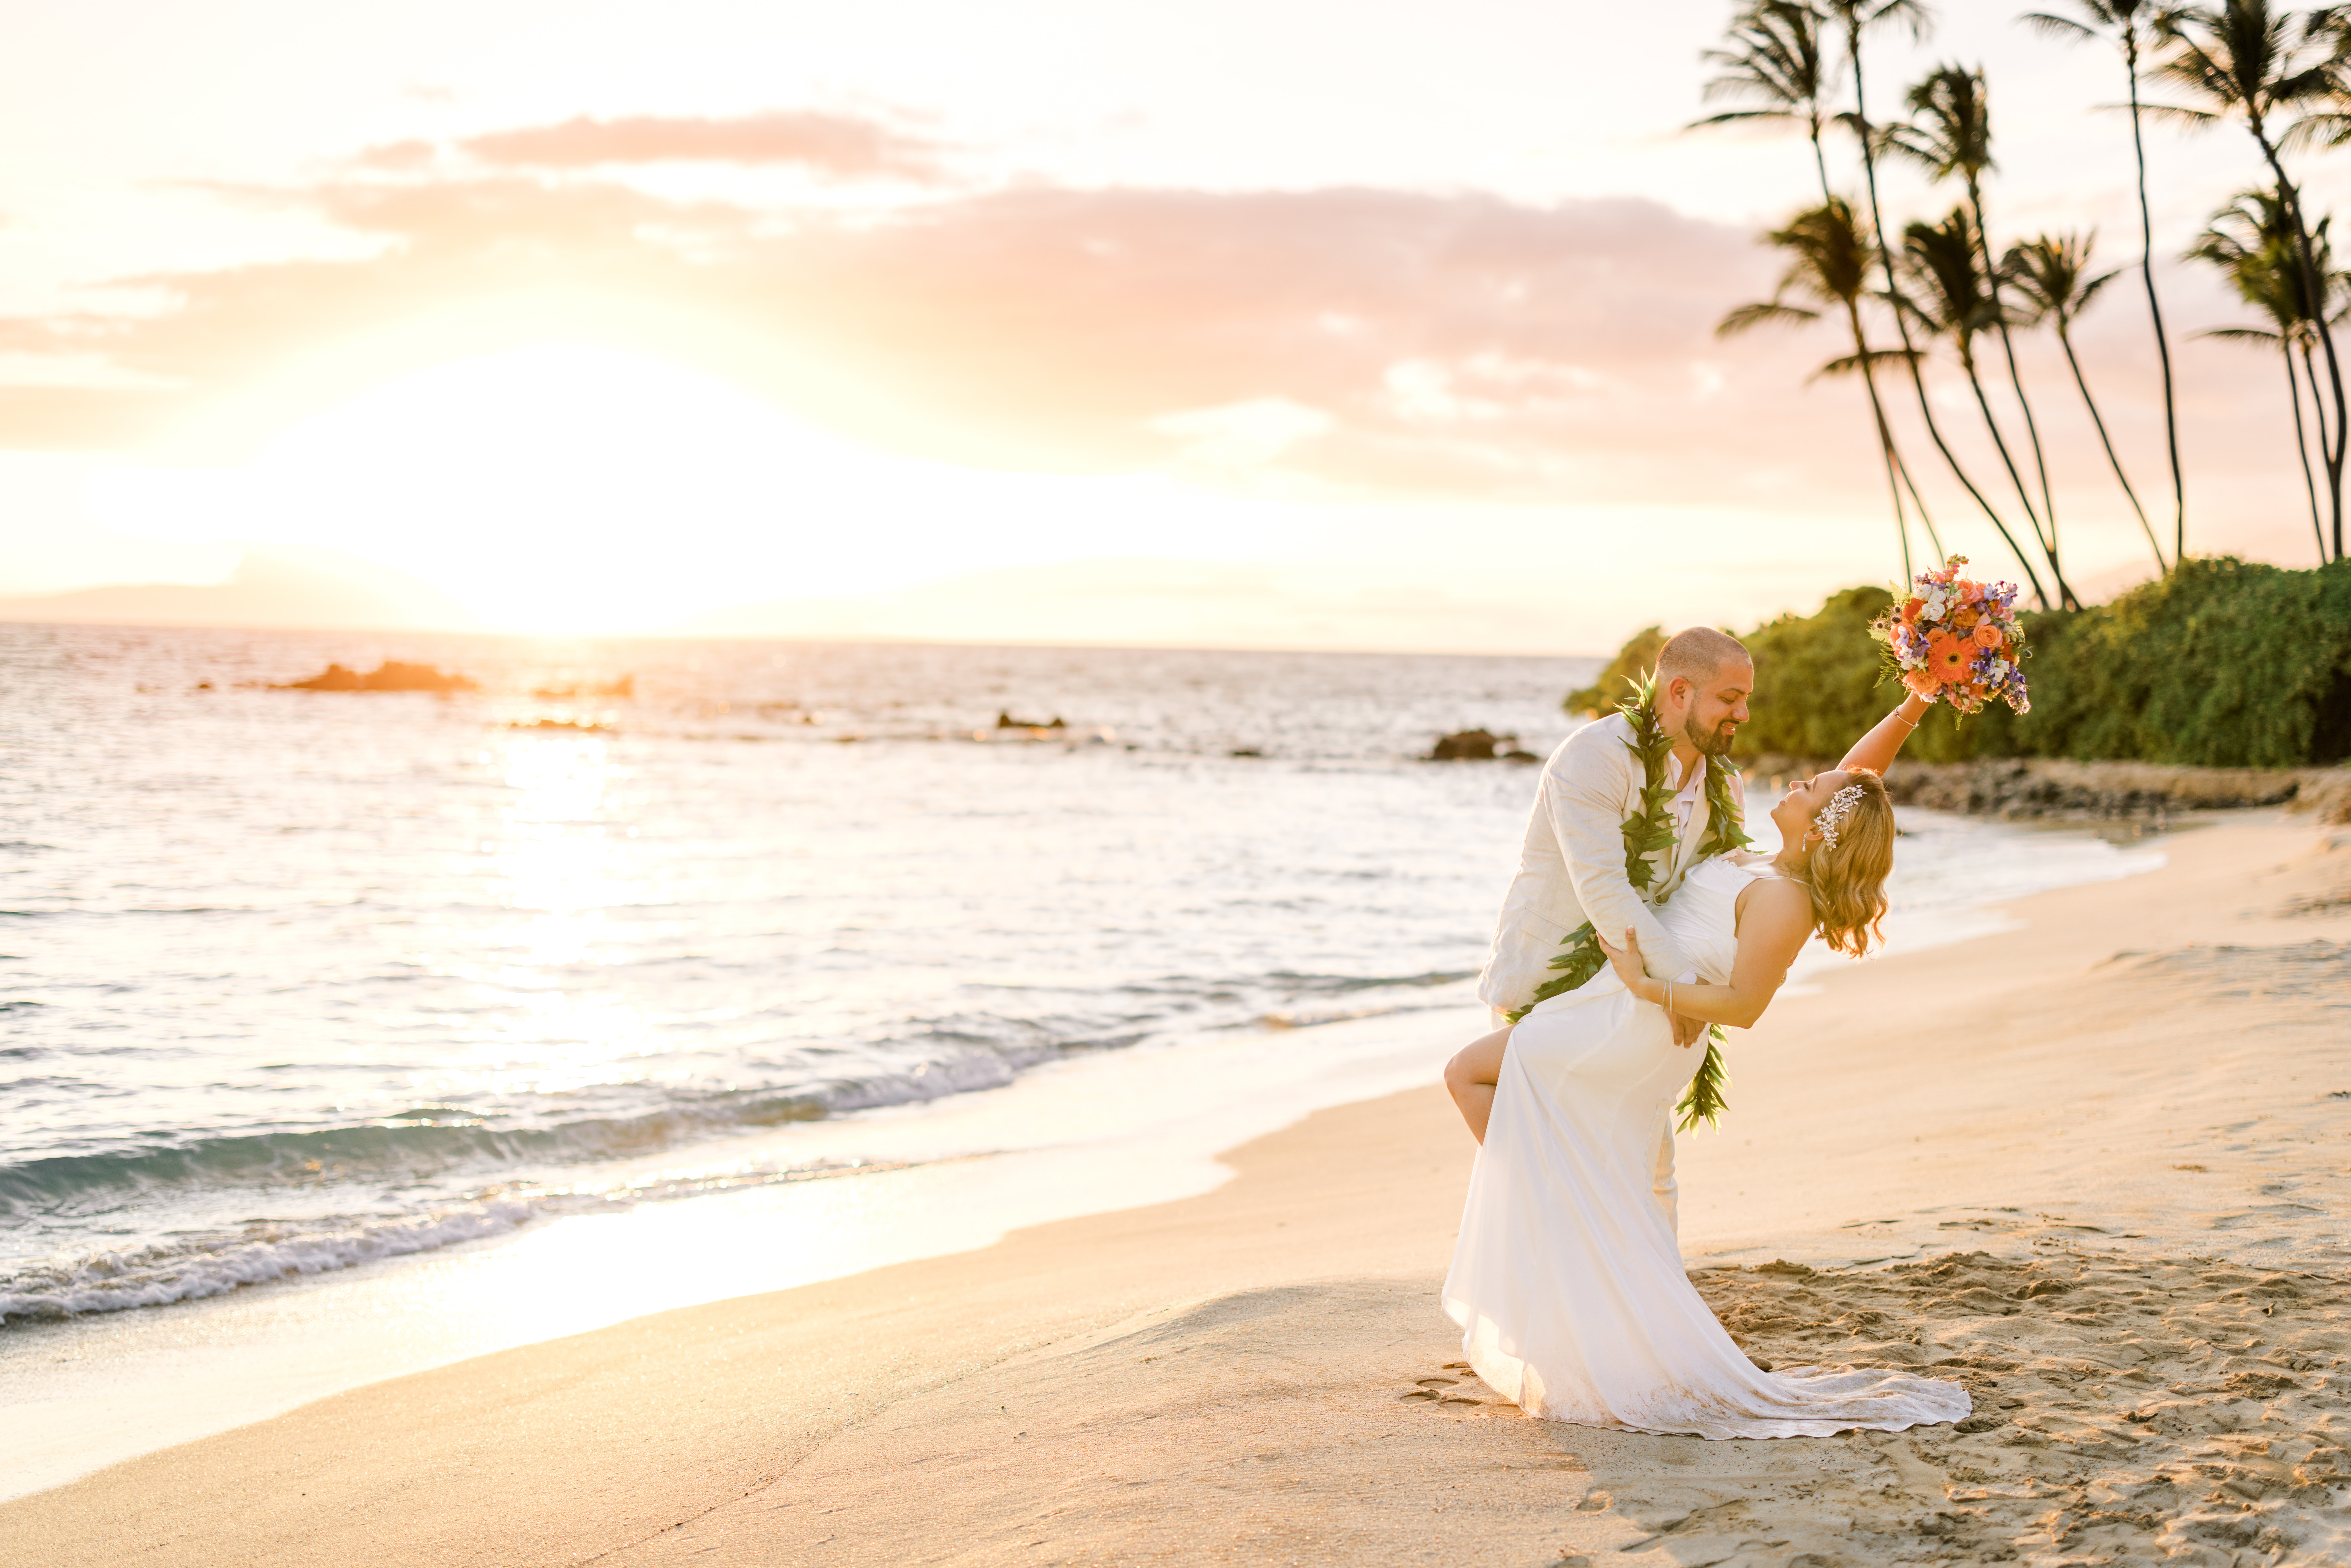 Groom dressing in a suit dips bride wearing white dress and holding flowers in Wailea for their elopement